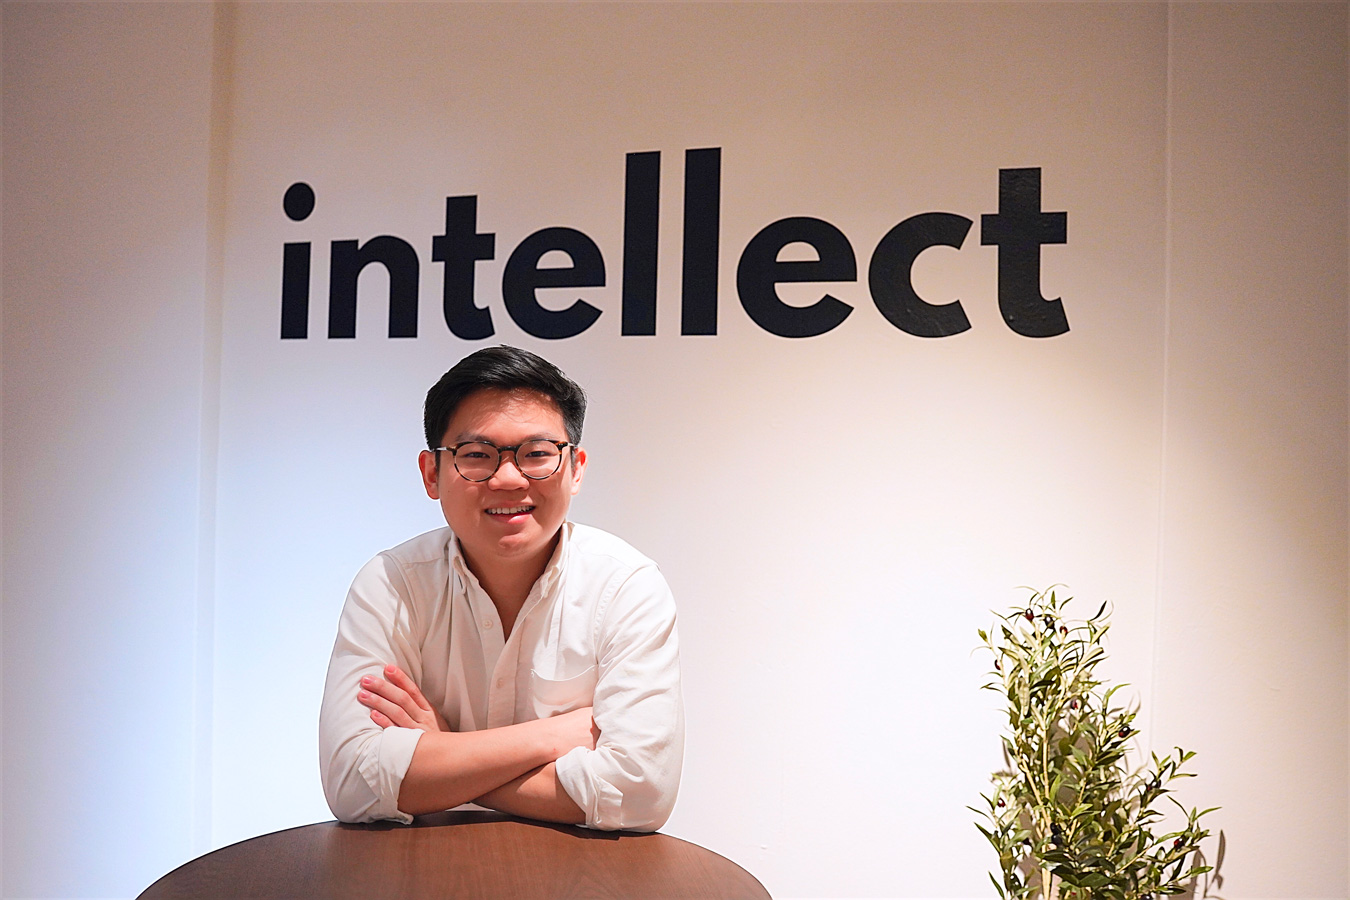 Theodoric Chew, co-founder and CEO of Intellect standing in white shirt